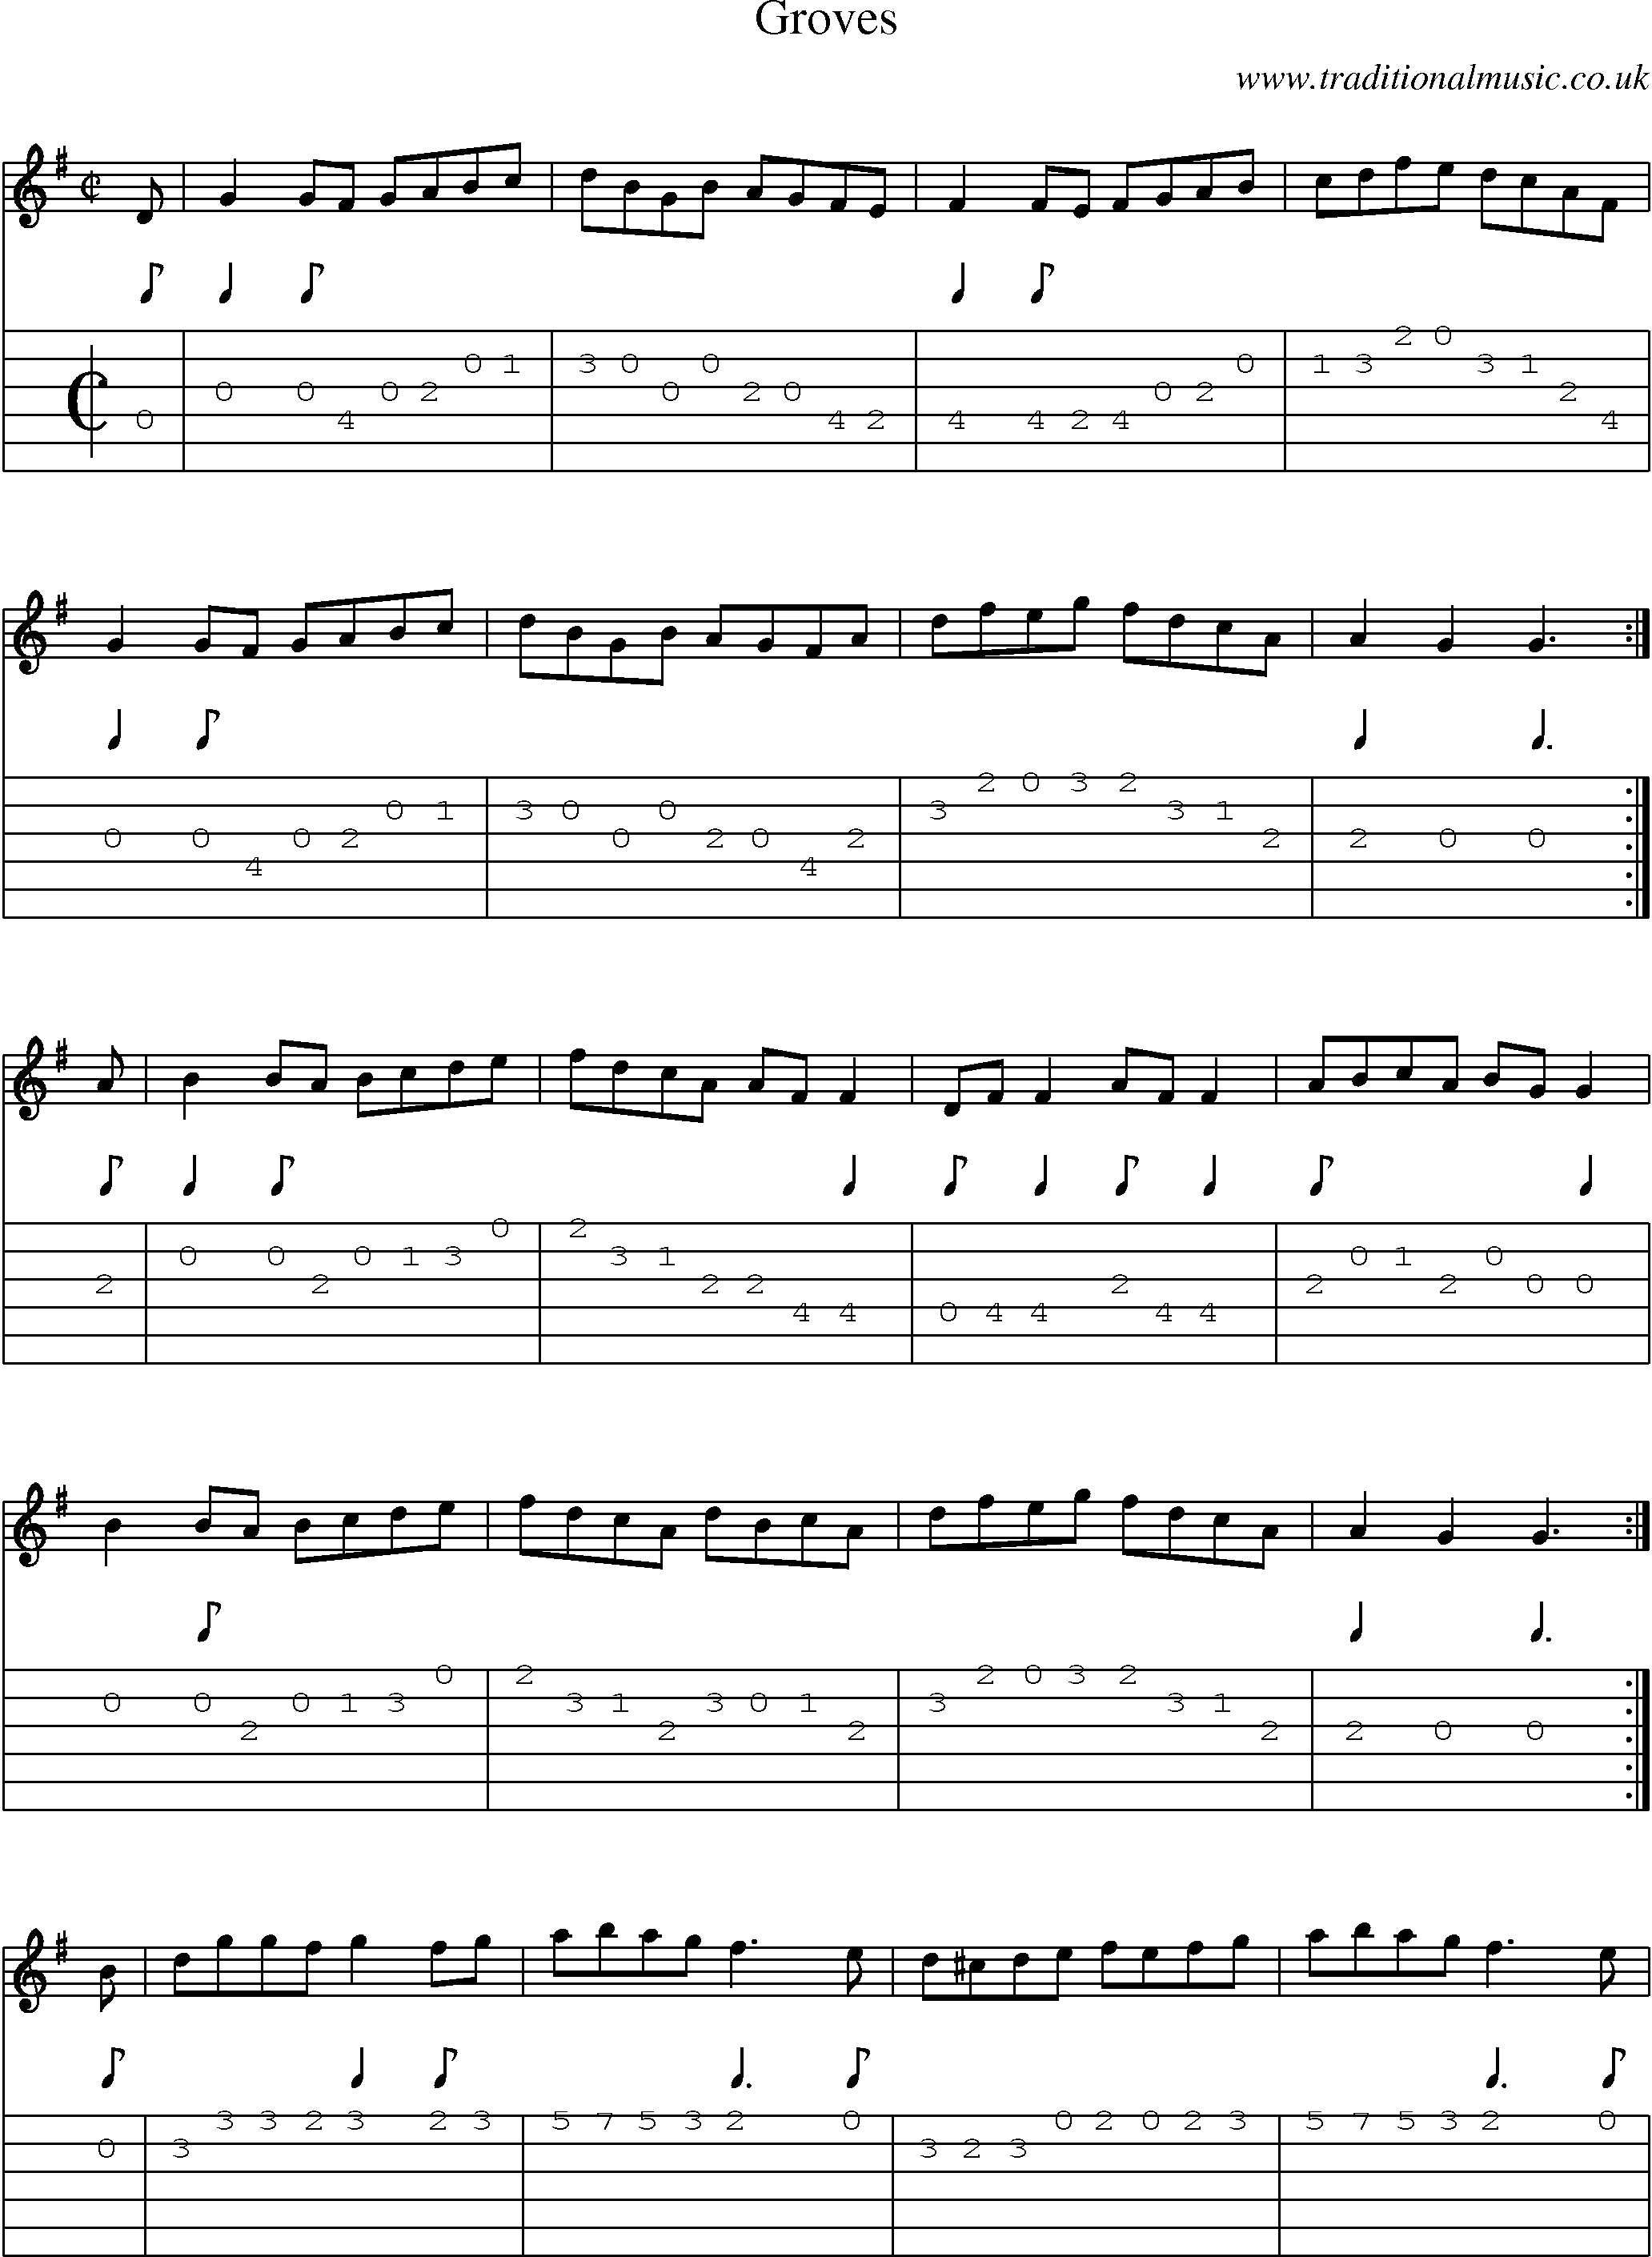 Music Score and Guitar Tabs for Groves